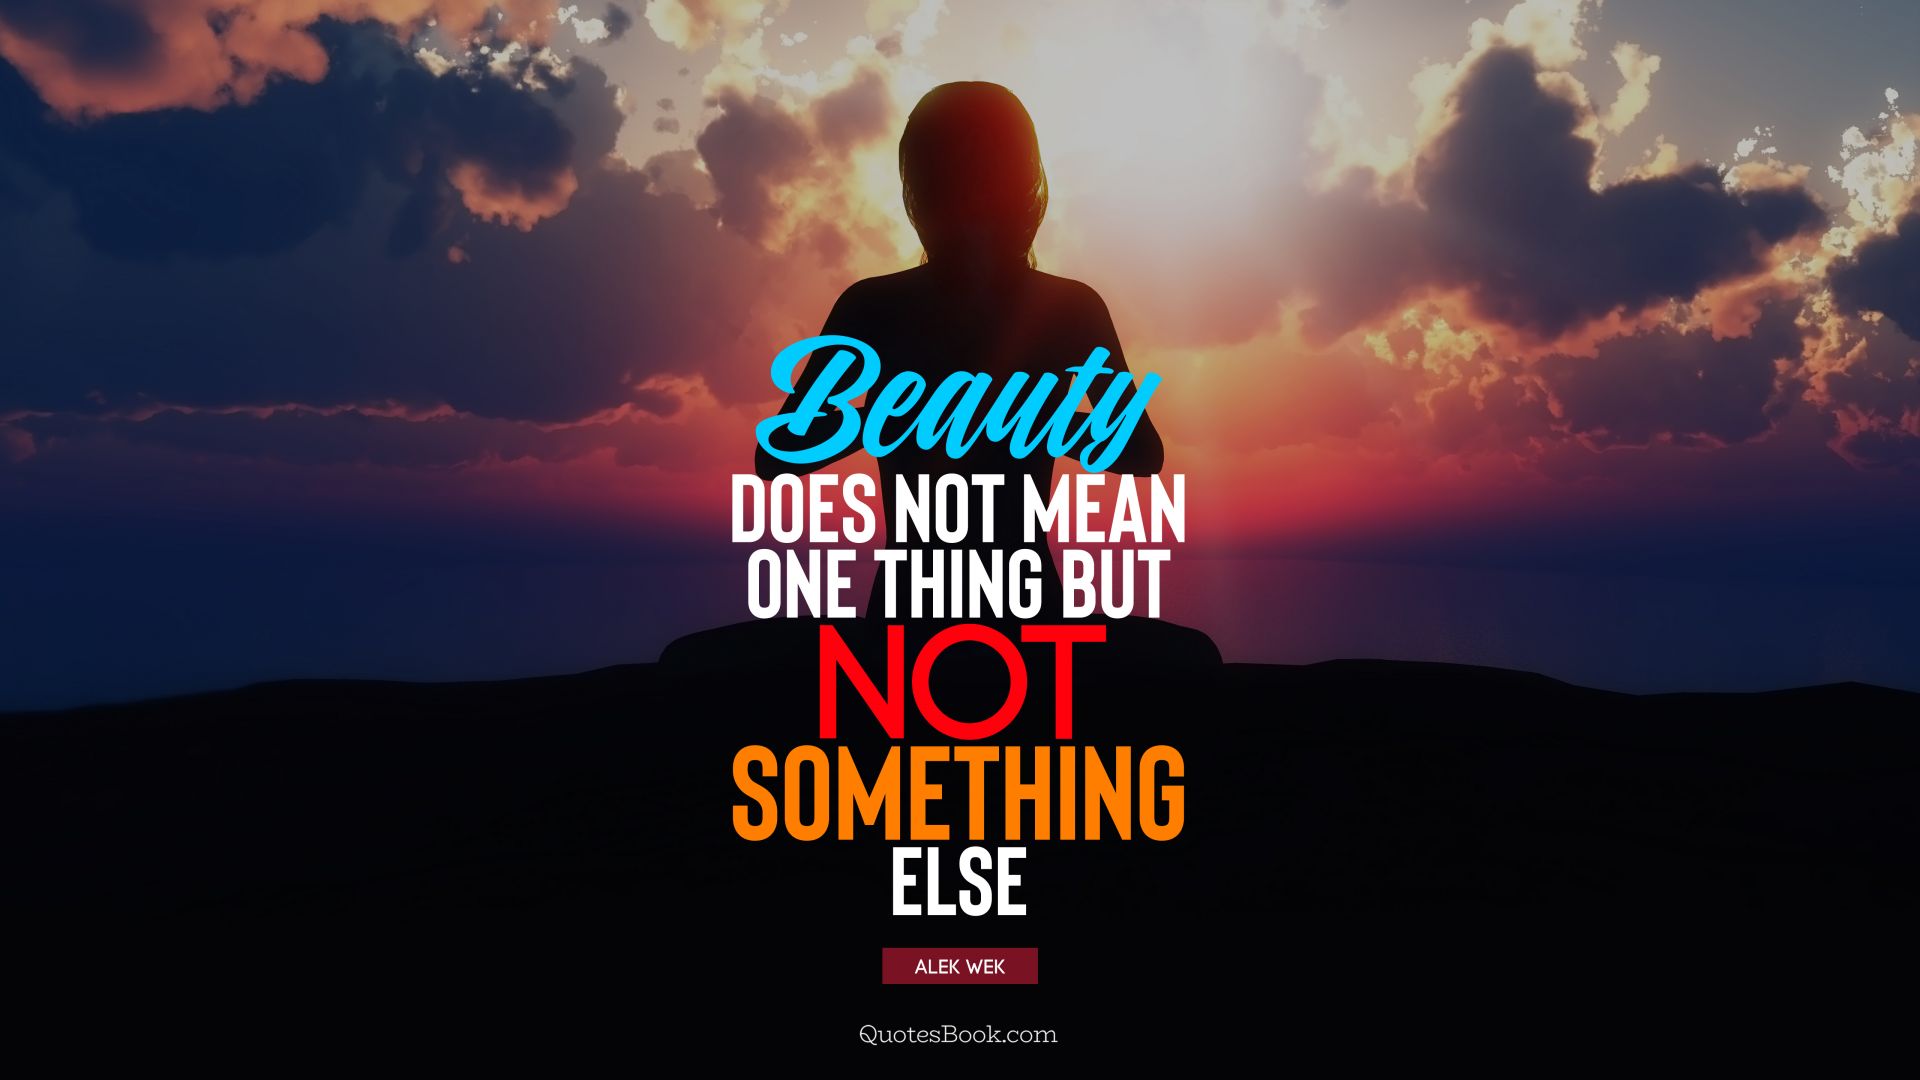 Beauty does not mean one thing but not something else. - Quote by Alek Wek